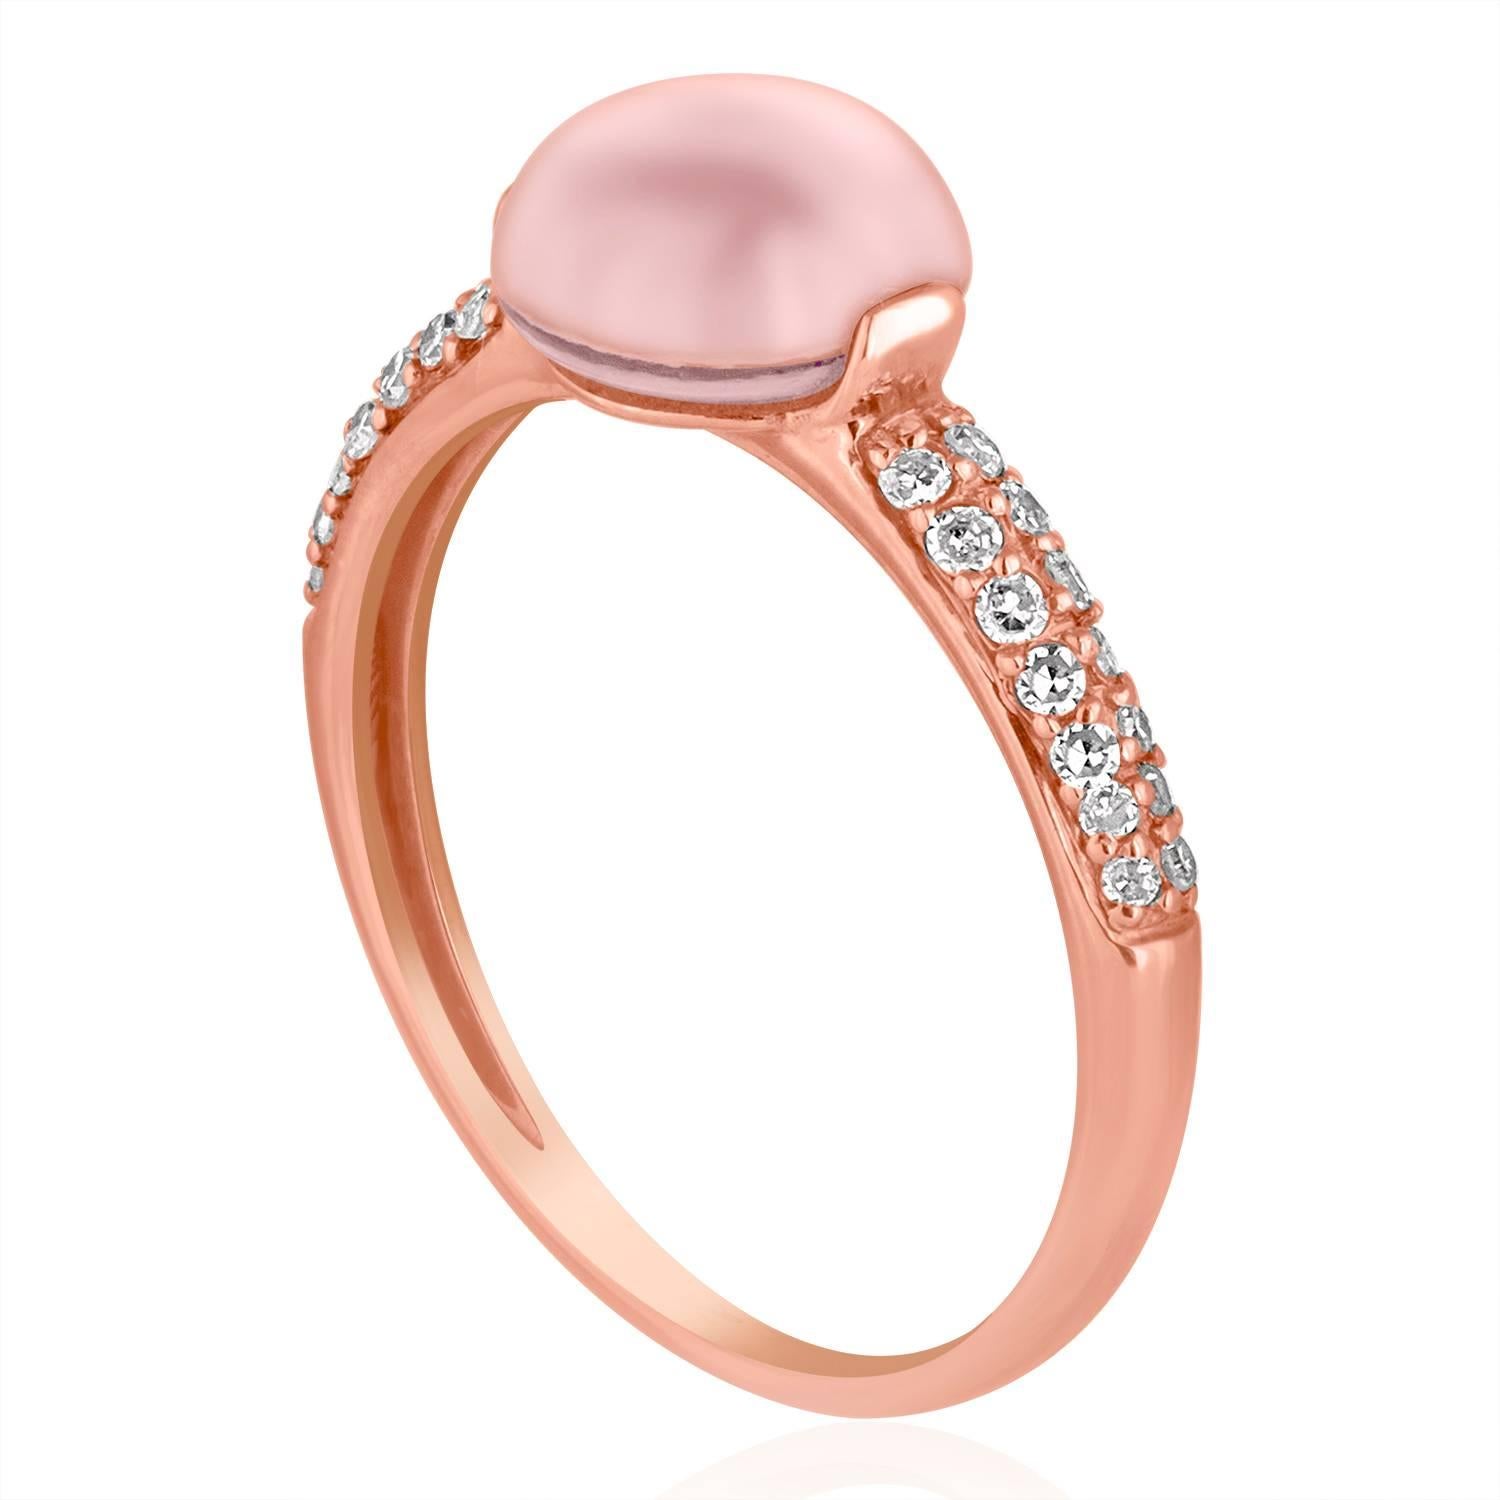 Beautiful Cabochon Ring
The ring is 14K Rose Gold
There are 0.19 Carats In Diamonds H SI
The Center Stone is Cabochon Round 2.22 Carat Amethyst
The top measures 6/16